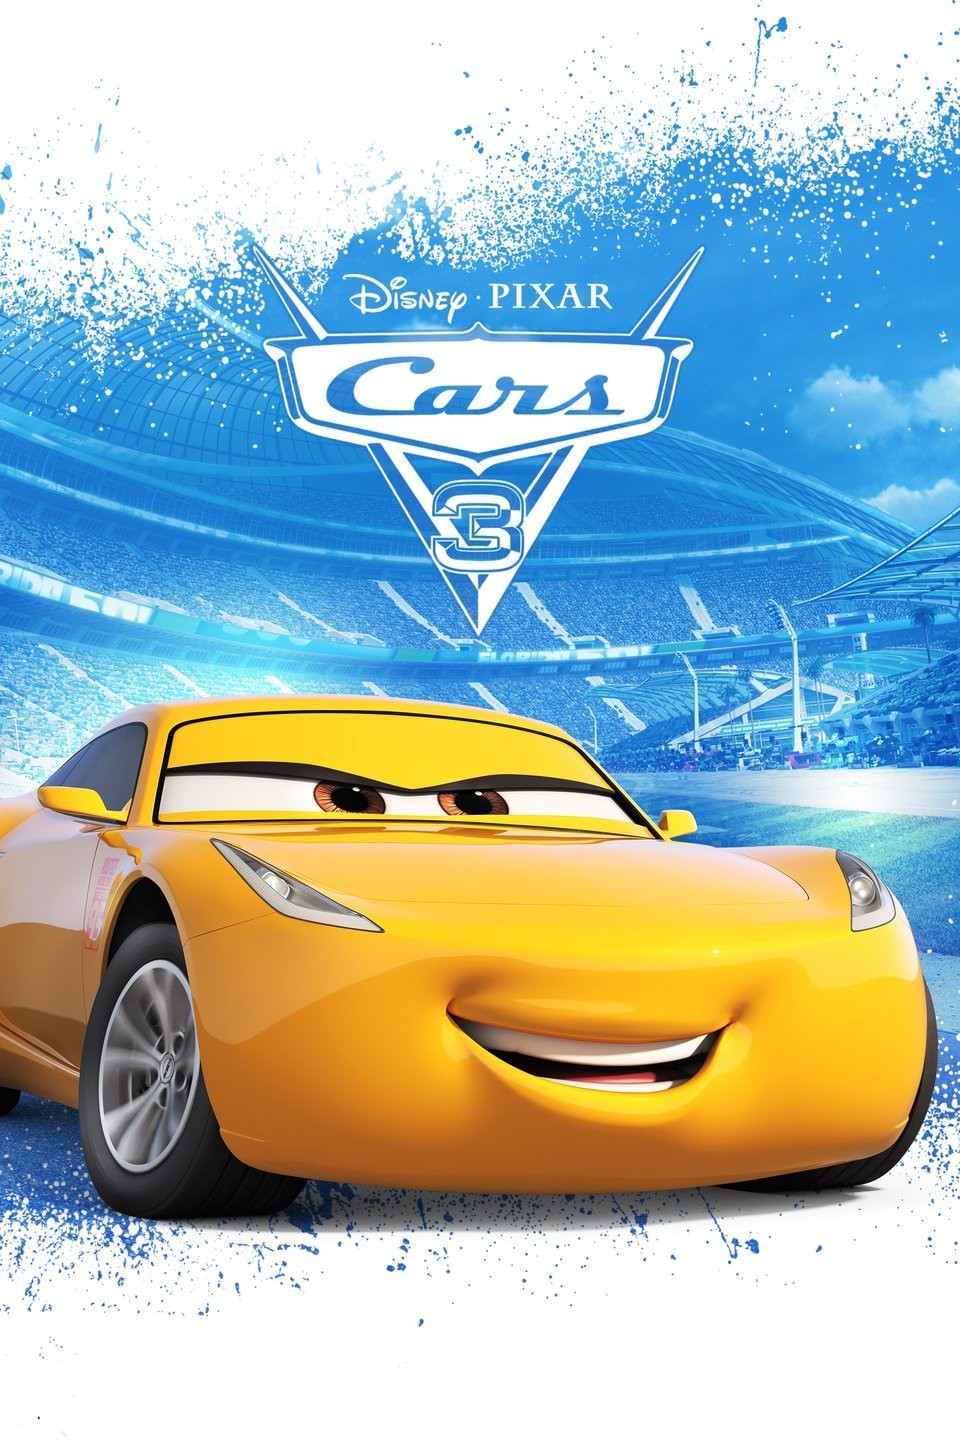 Cars 3: Driven To Win - Xbox 360 : Target